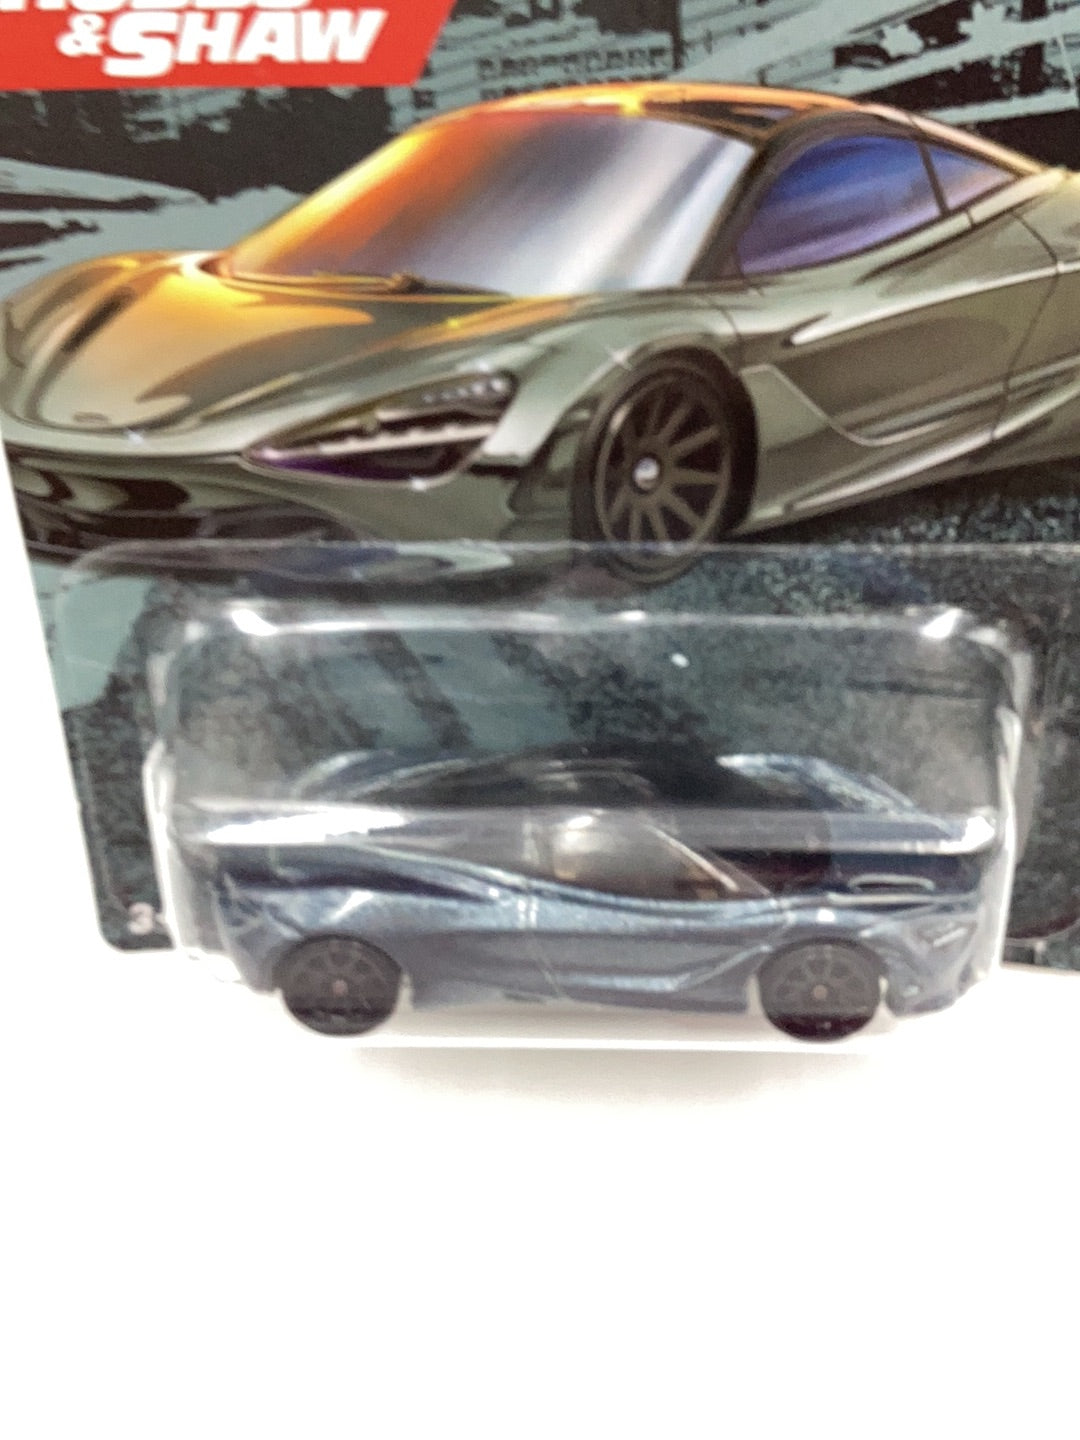 Hot wheels fast and furious 3/5 McLaren 720S 151I